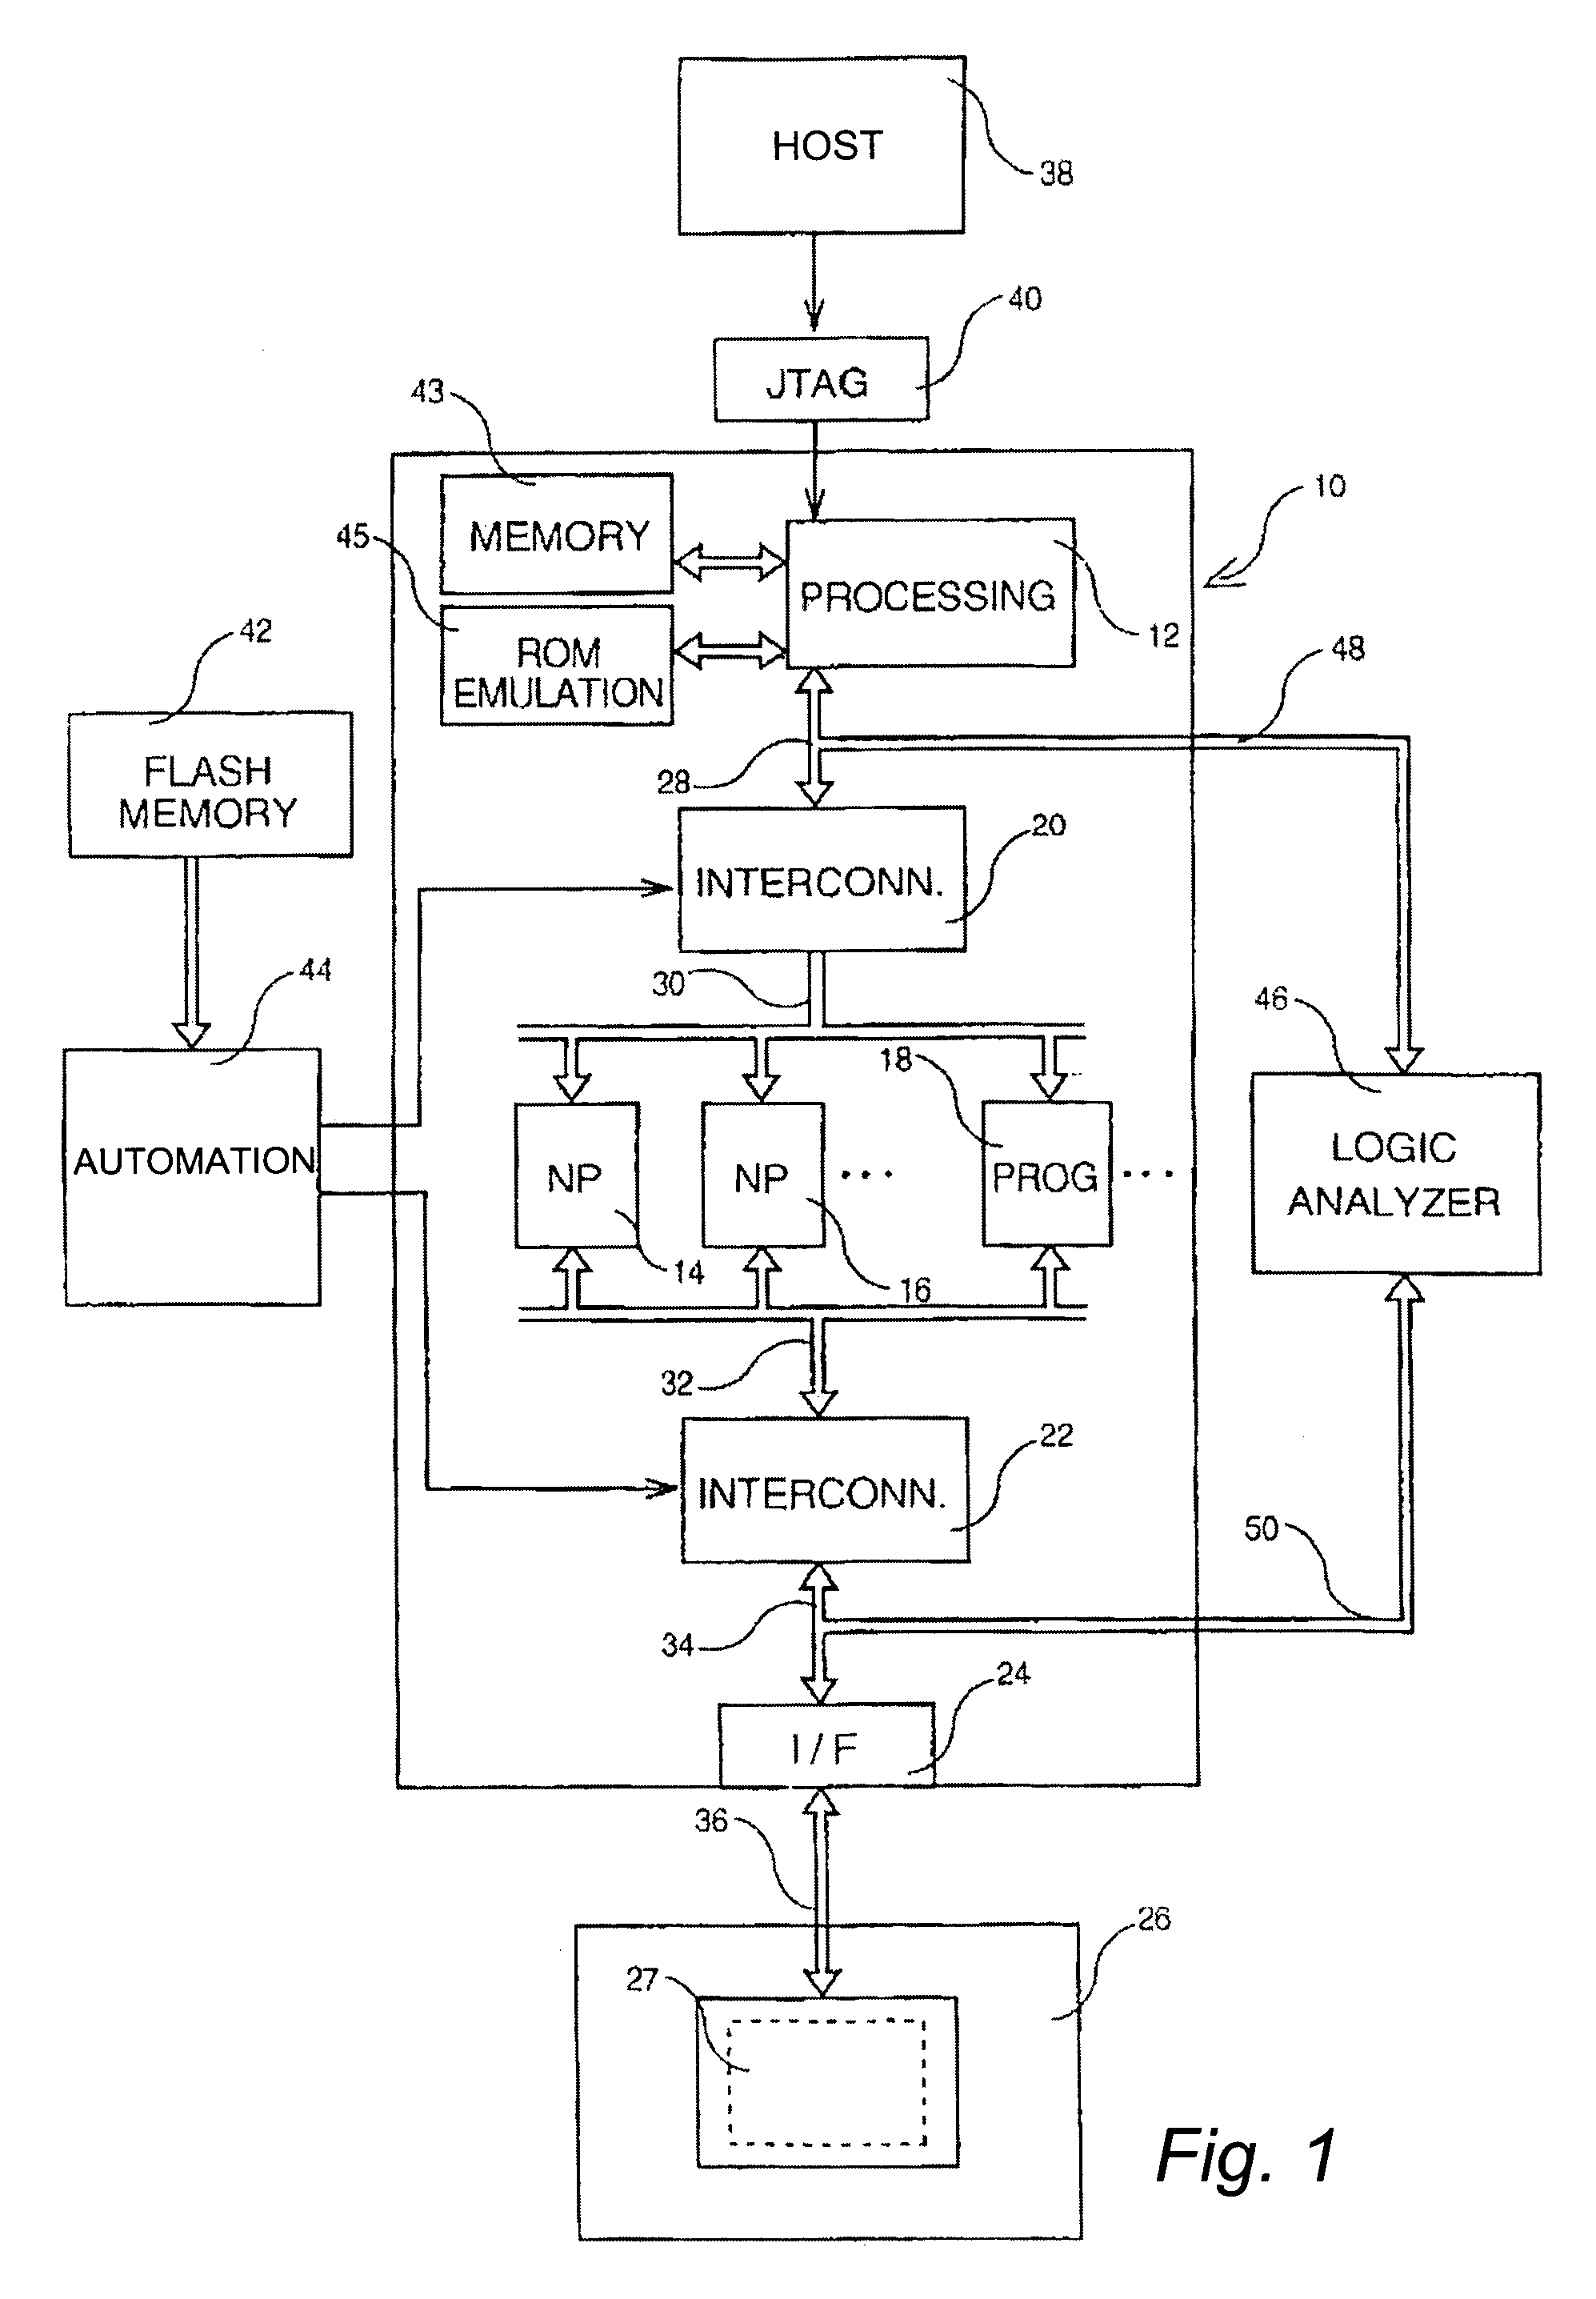 Functional replicator of a specific integrated circuit and its use as an emulation device